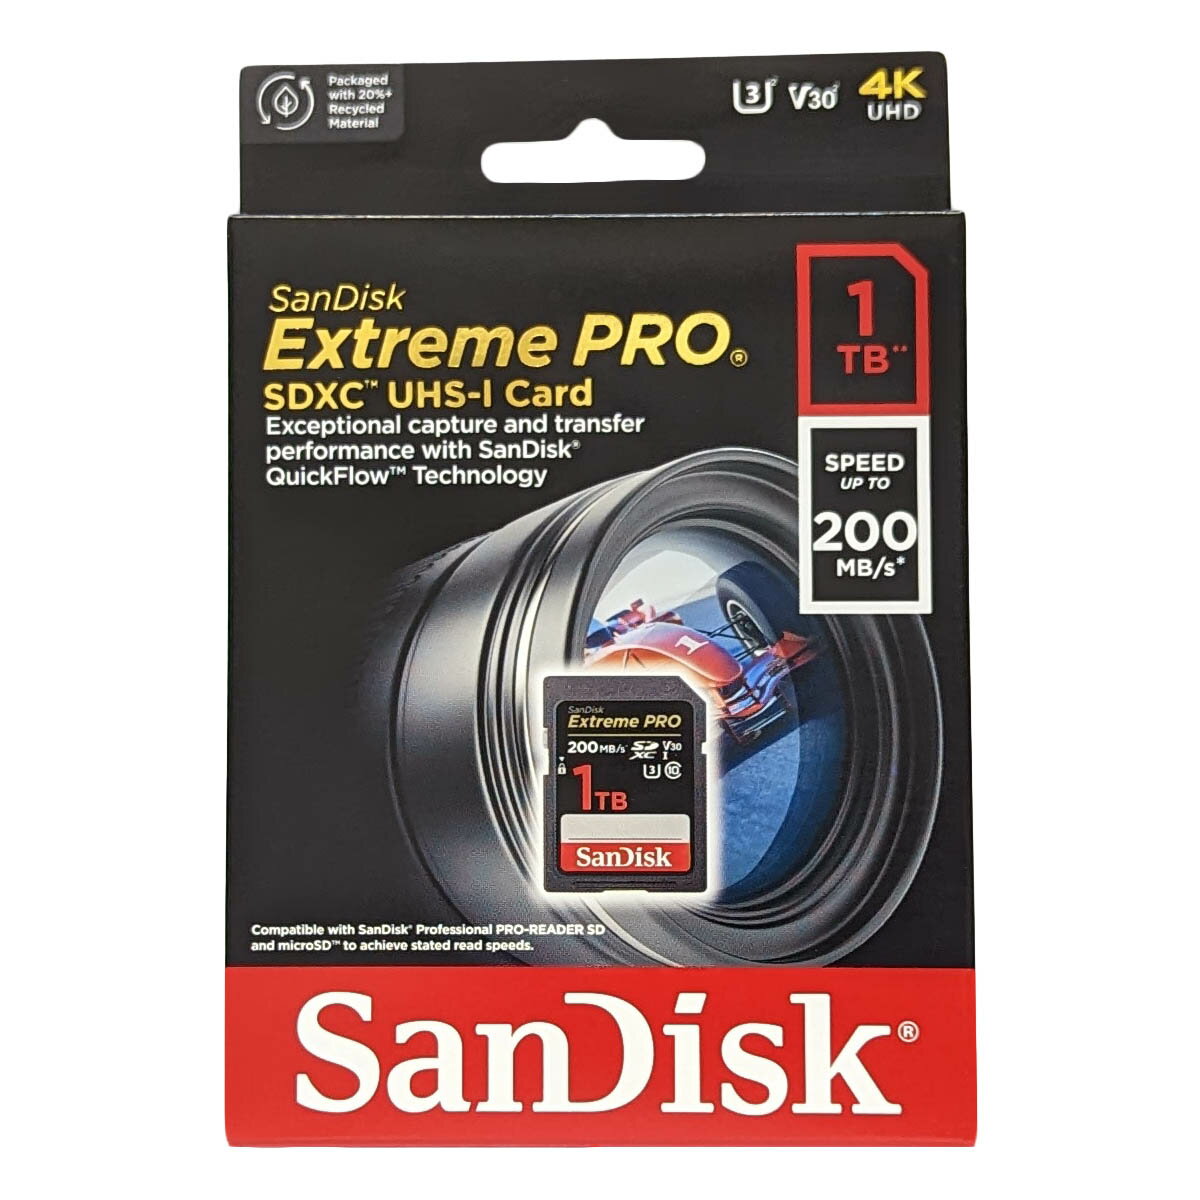 SanDisk サンディスク 並行輸入品 SDXCカード Extreme PRO 1TB SDSDXXD-1T00-GN4IN